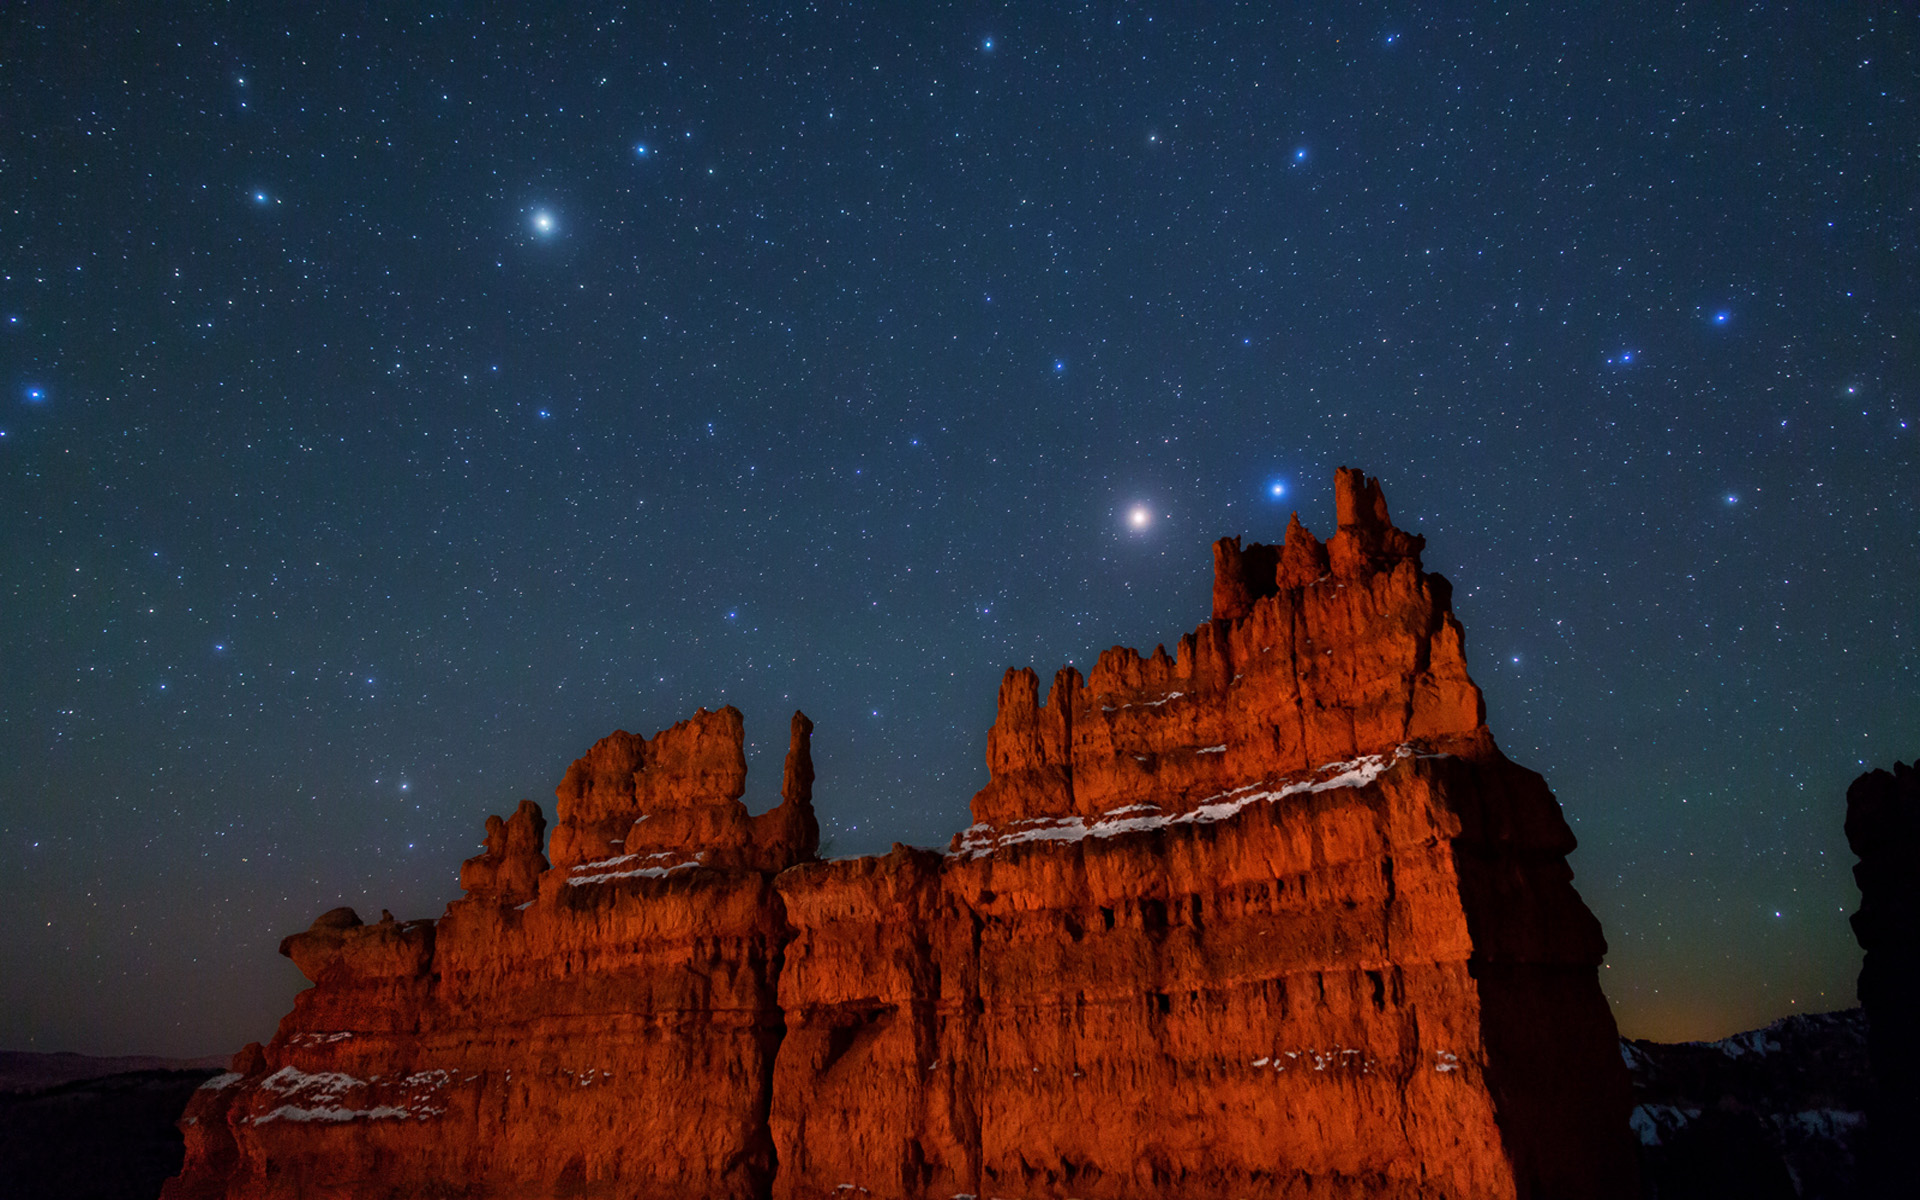 bryce canyon national park, earth, canyon, night, sky, starry sky, stars, canyons